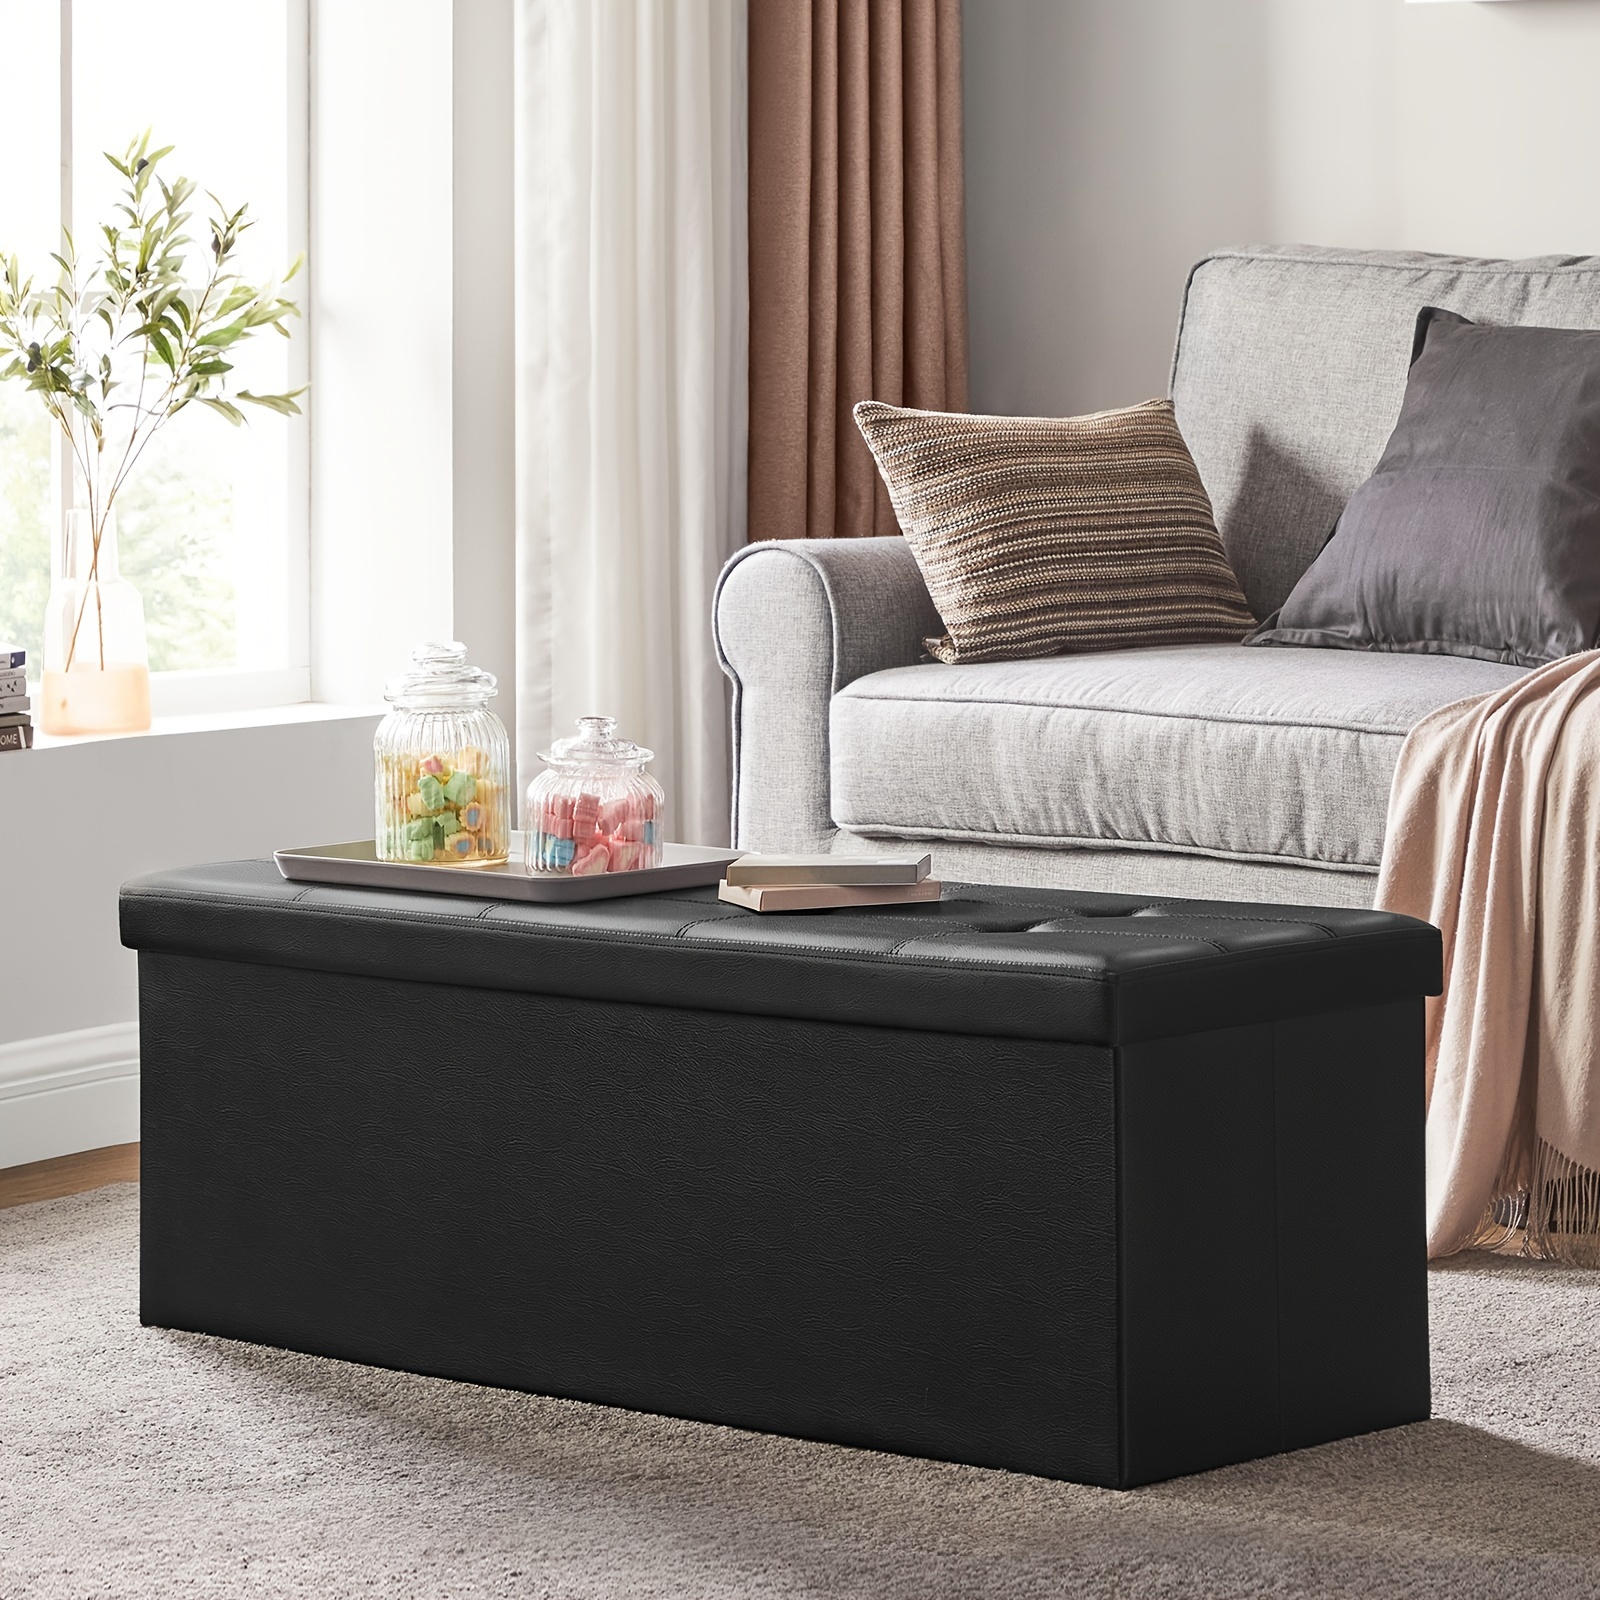 

43 Inches Folding Storage Ottoman Bench, Storage Chest, Footrest, Coffee Table, Padded Seat